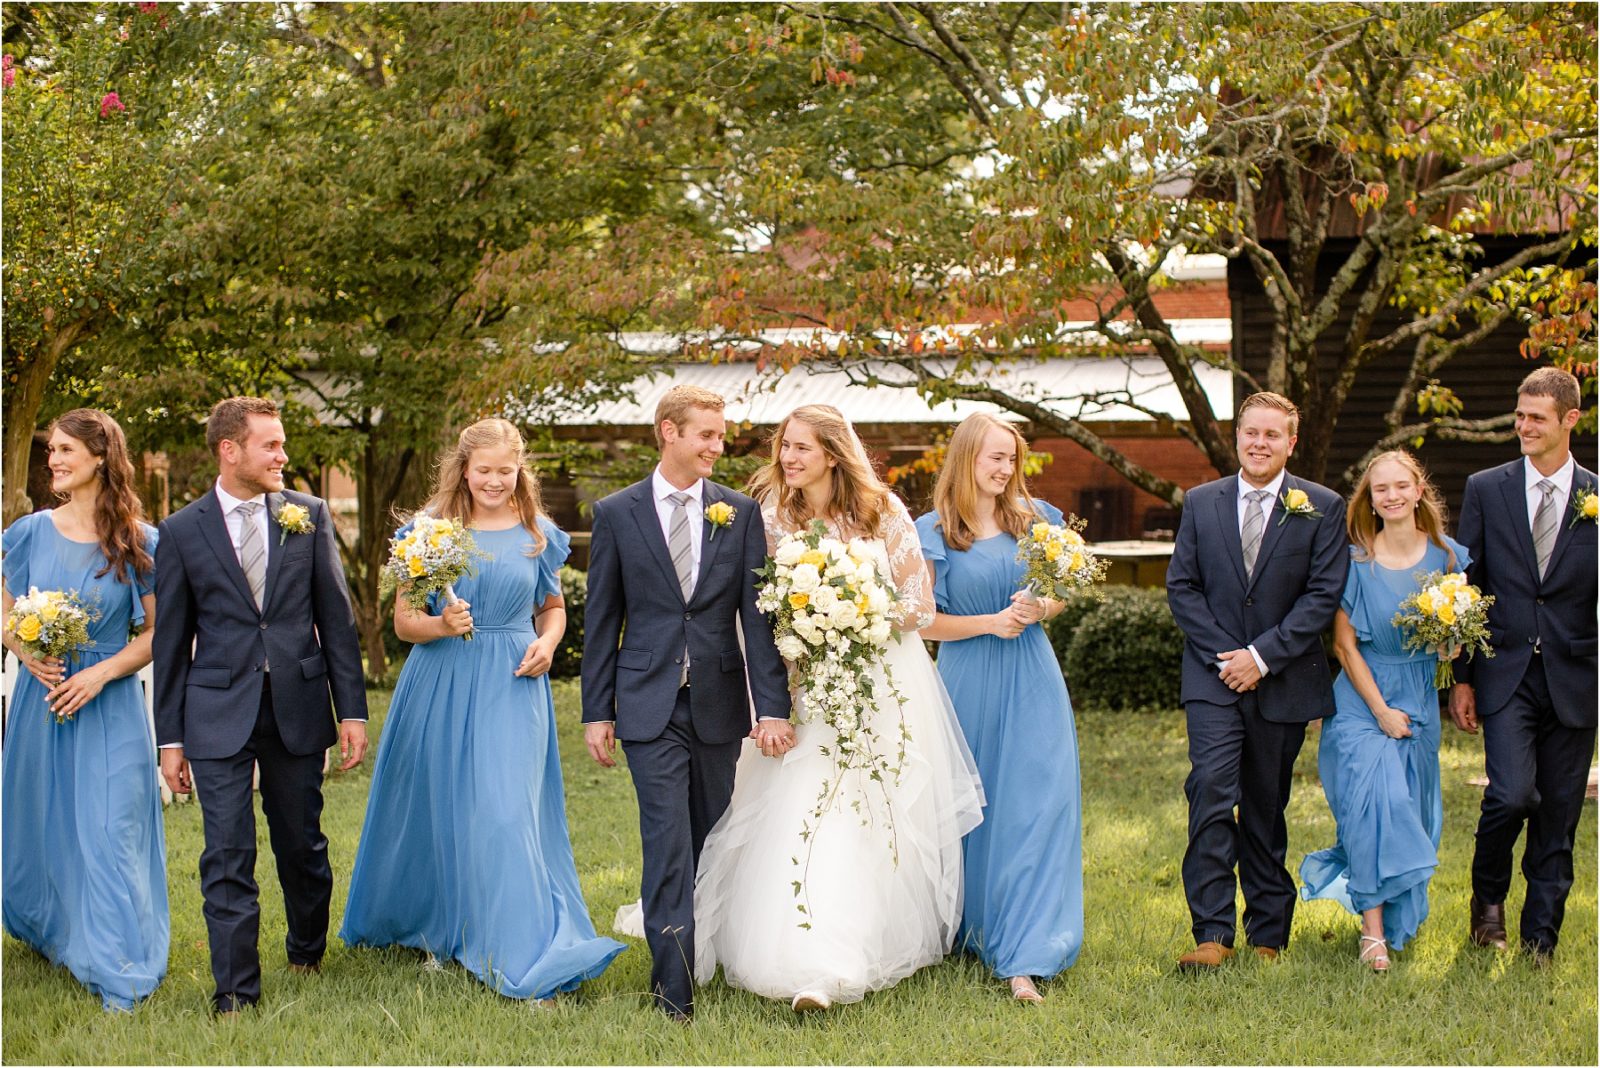 Bridal party walks with bride and groom